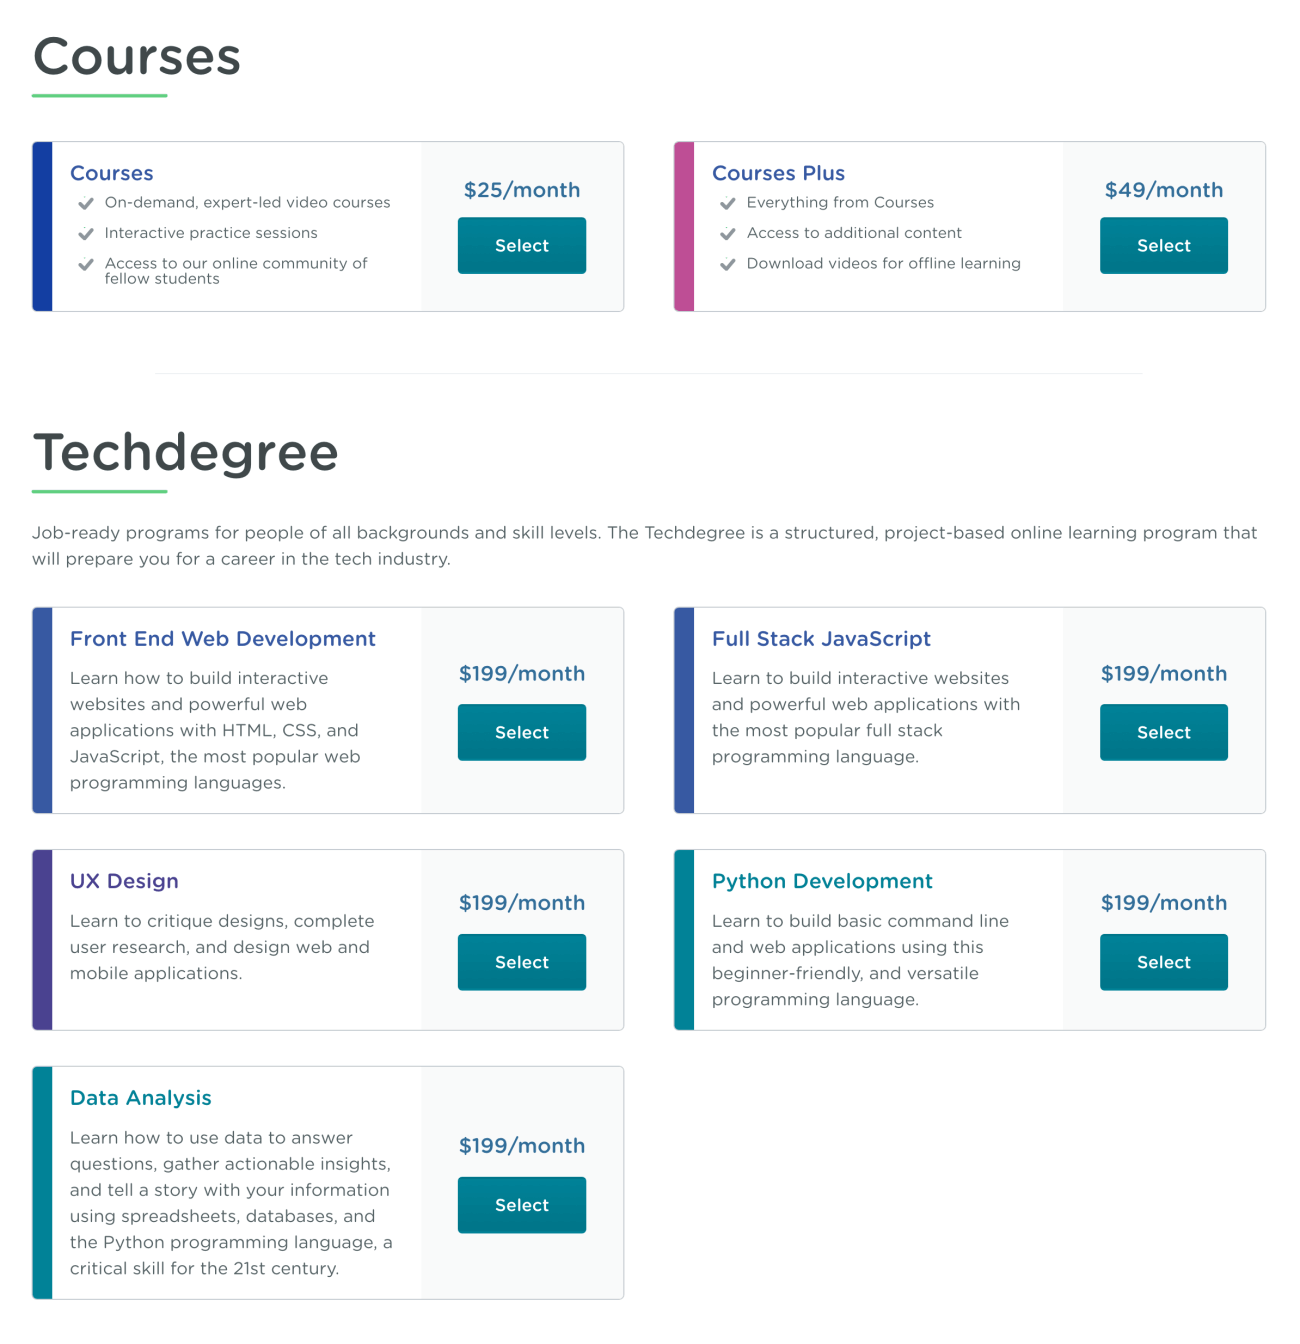 Team Treehouse pricing – Subscriptions and Techdegree programs